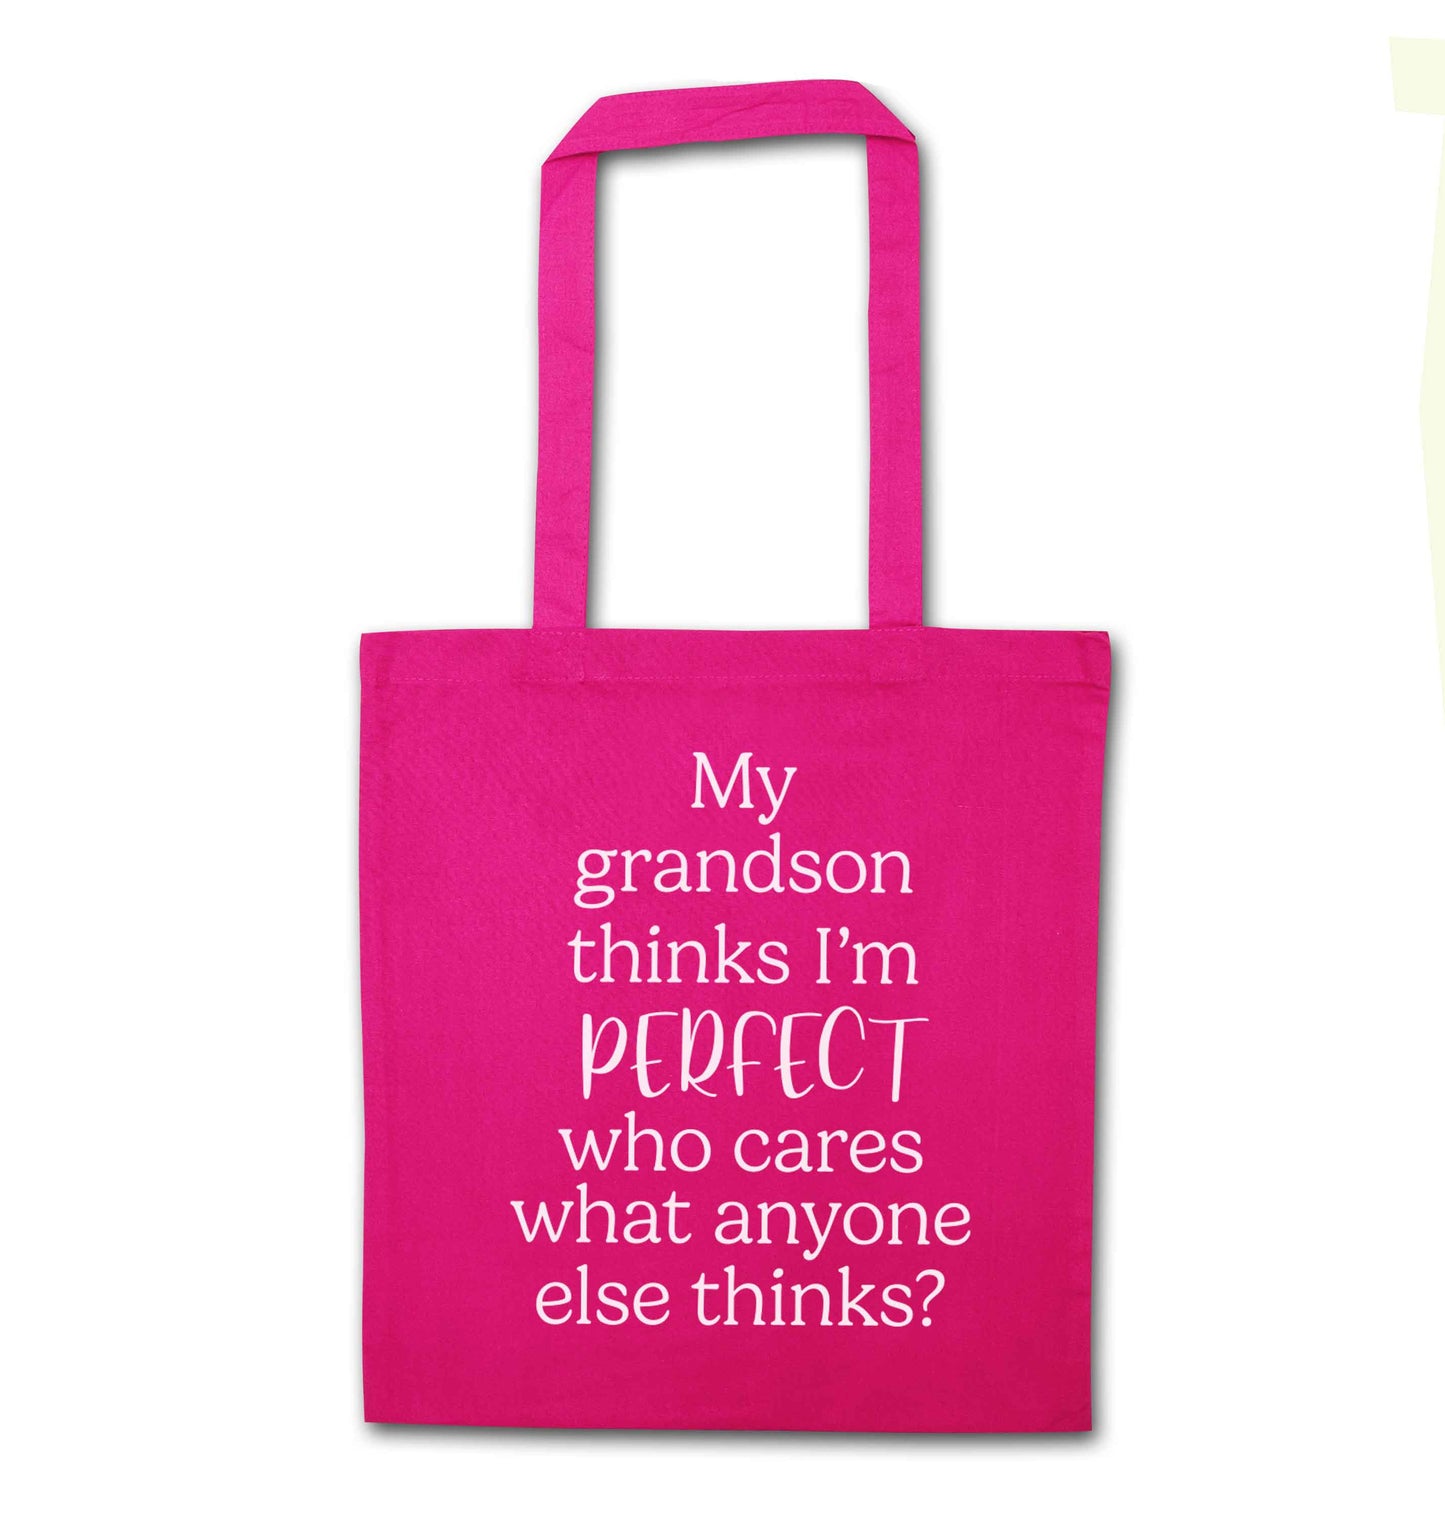 My Grandson thinks I'm perfect who cares what anyone else thinks? pink tote bag